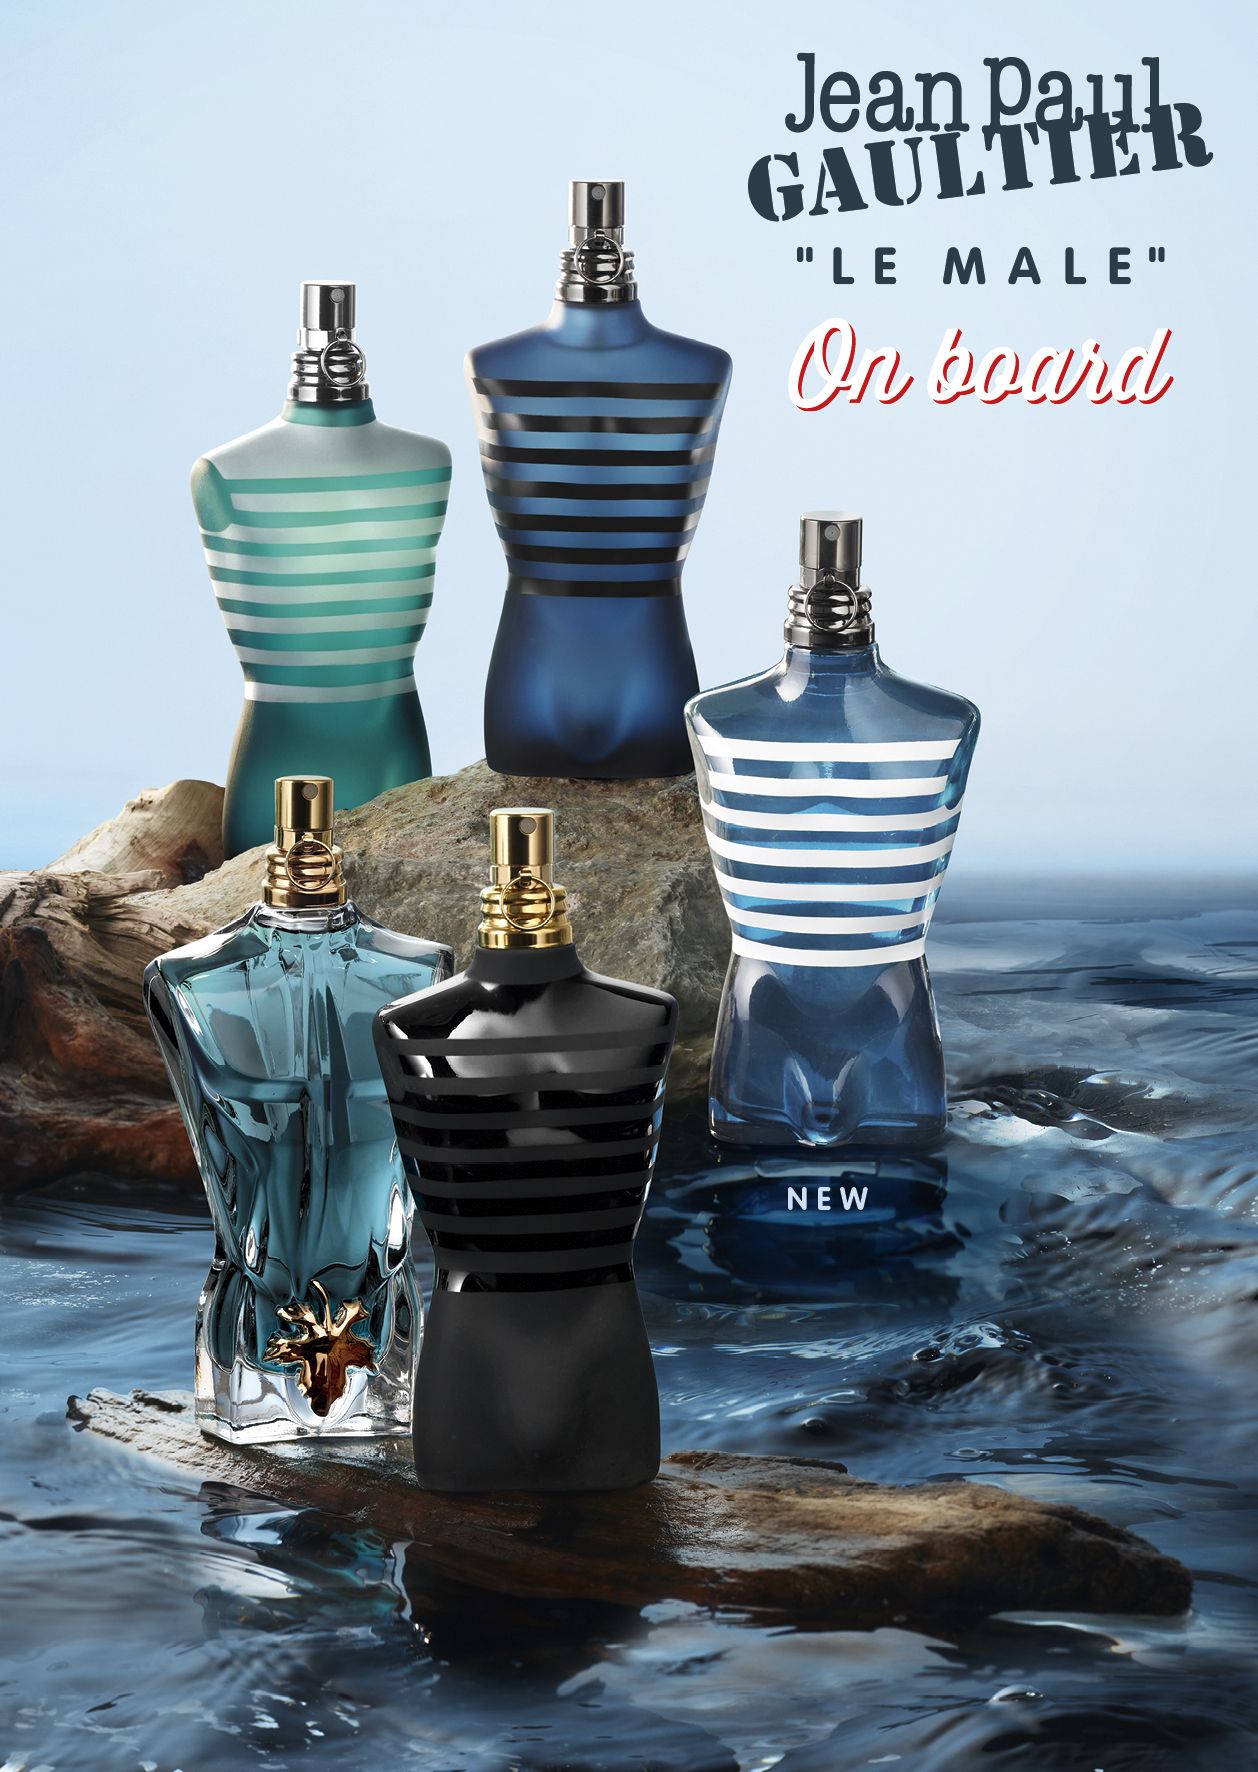 Le Male On Board Jean Paul Gaultier Cologne A New Fragrance For Men 2021